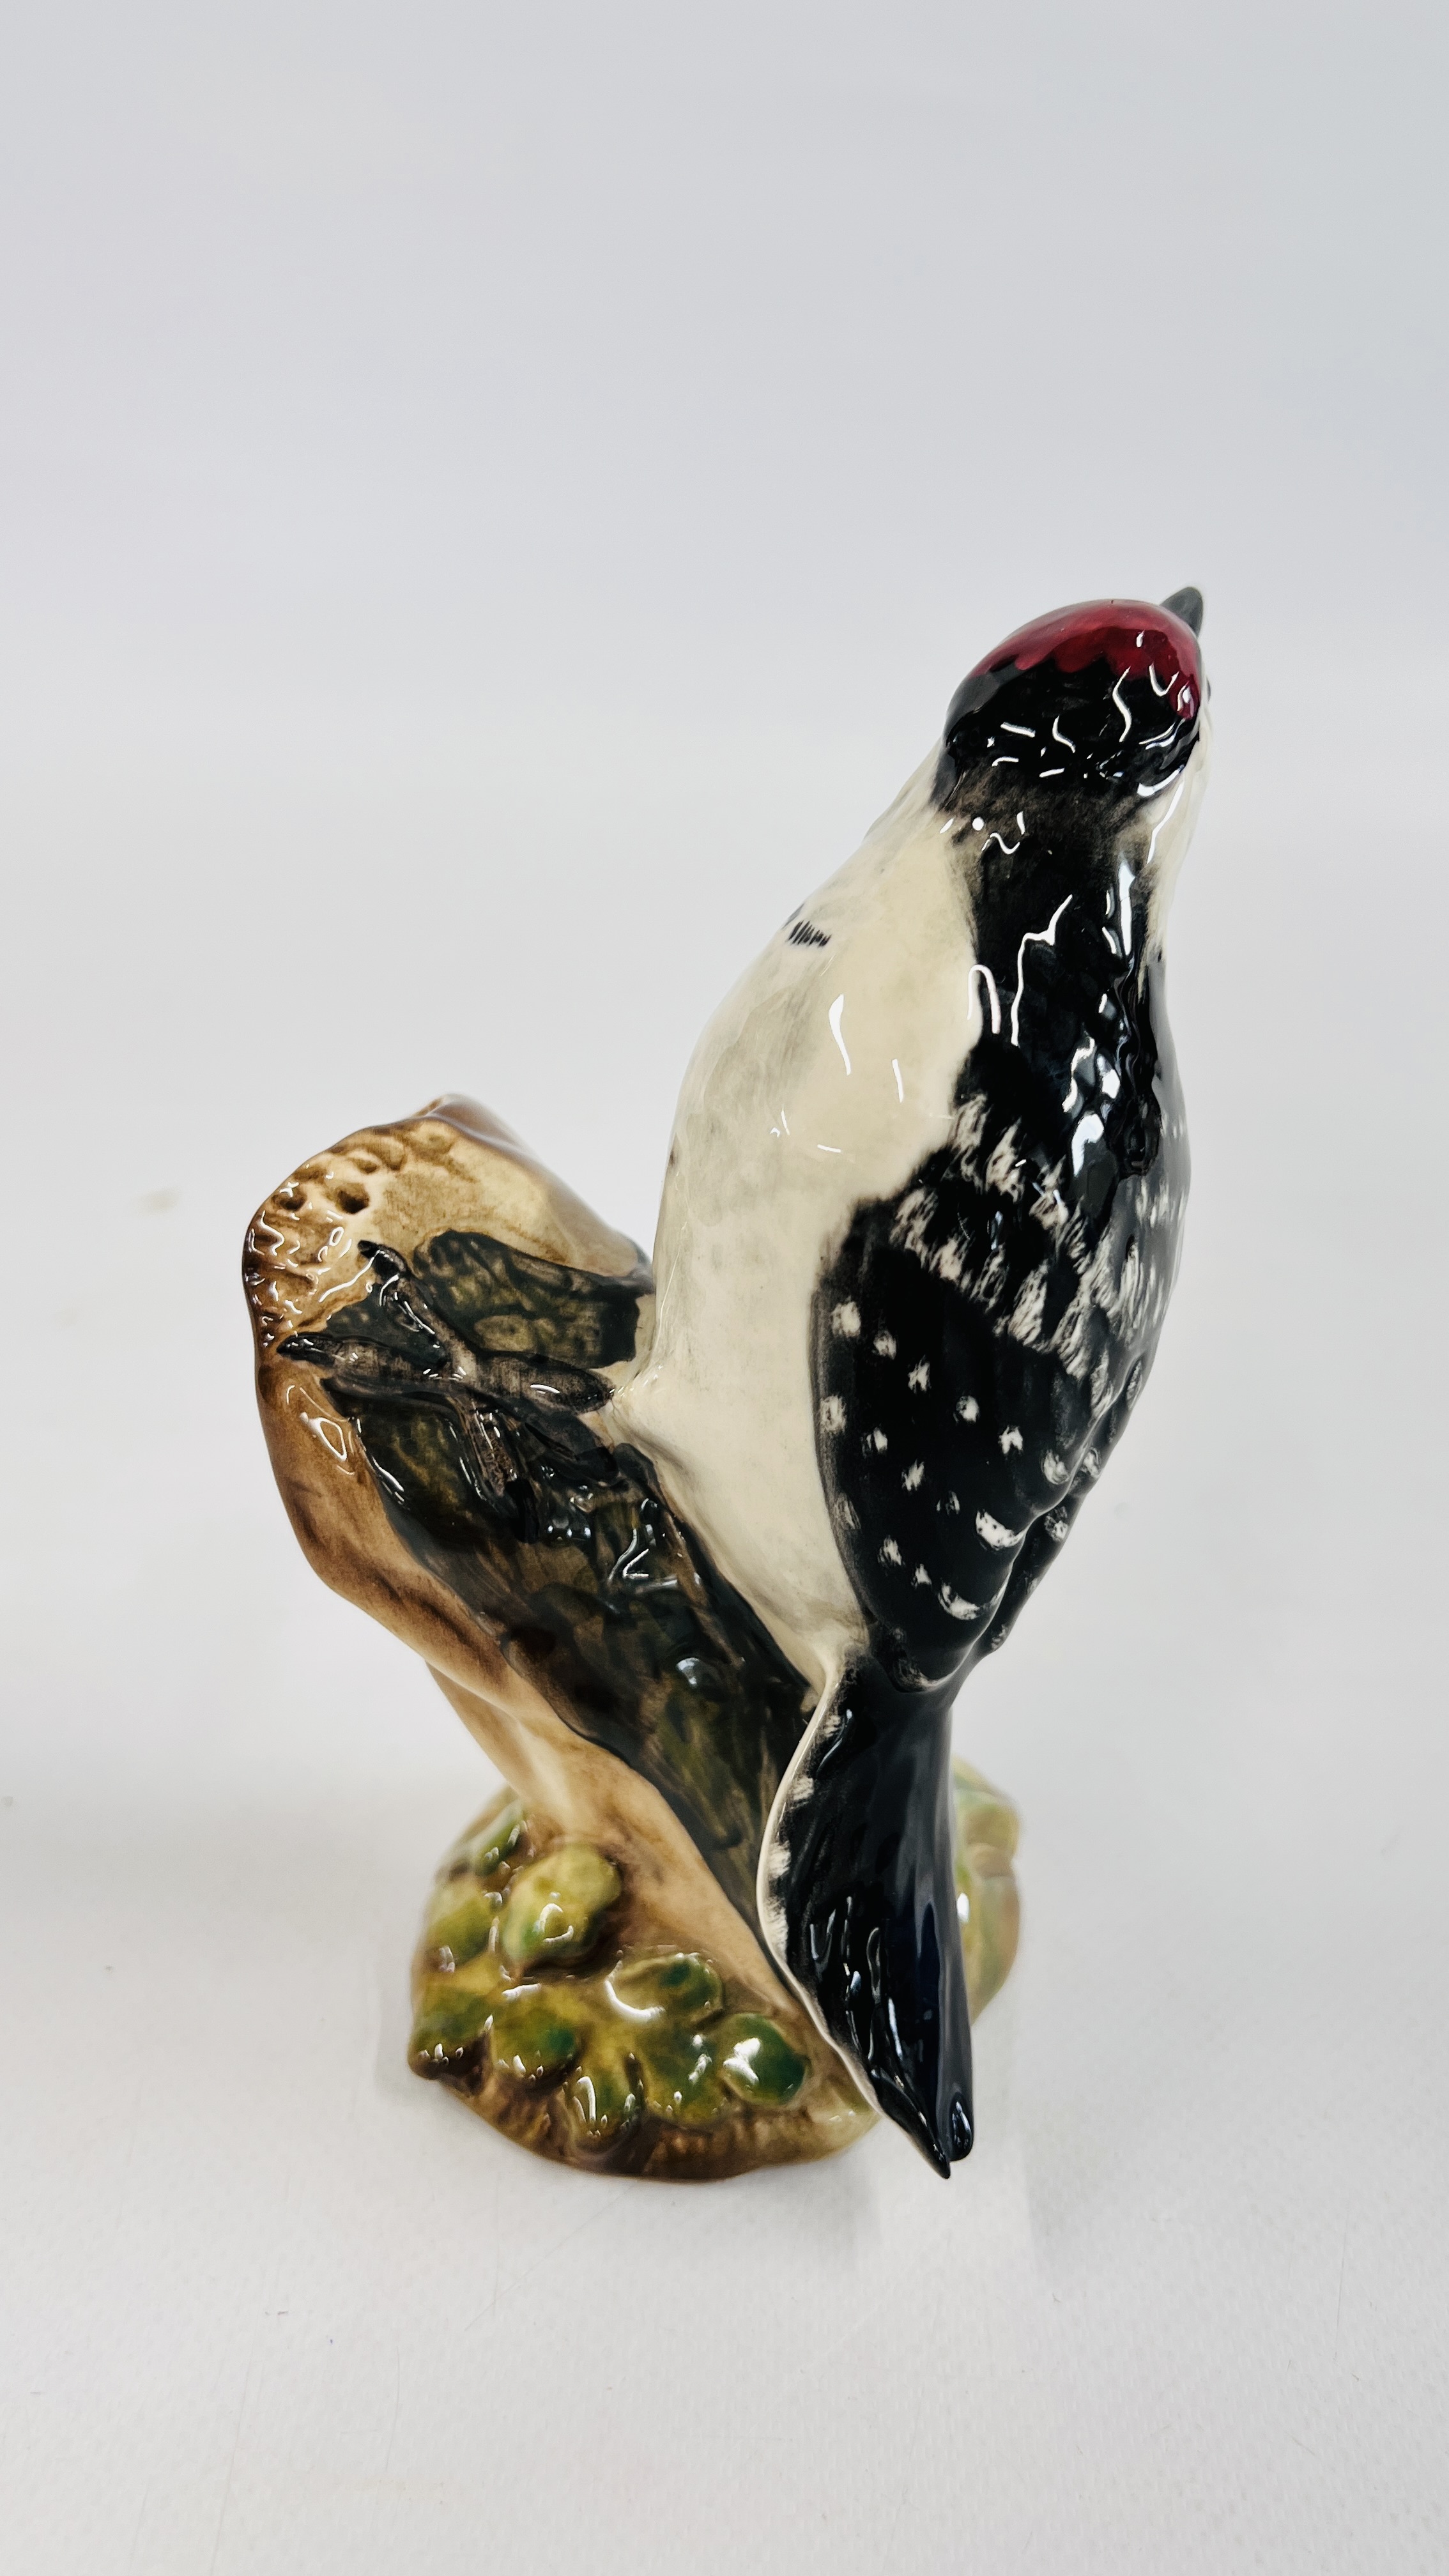 A BESWICK LESSER SPOTTED WOODPECKER FIGURE 2420 GLOSS FINISH - H 13.5CM. - Image 3 of 5